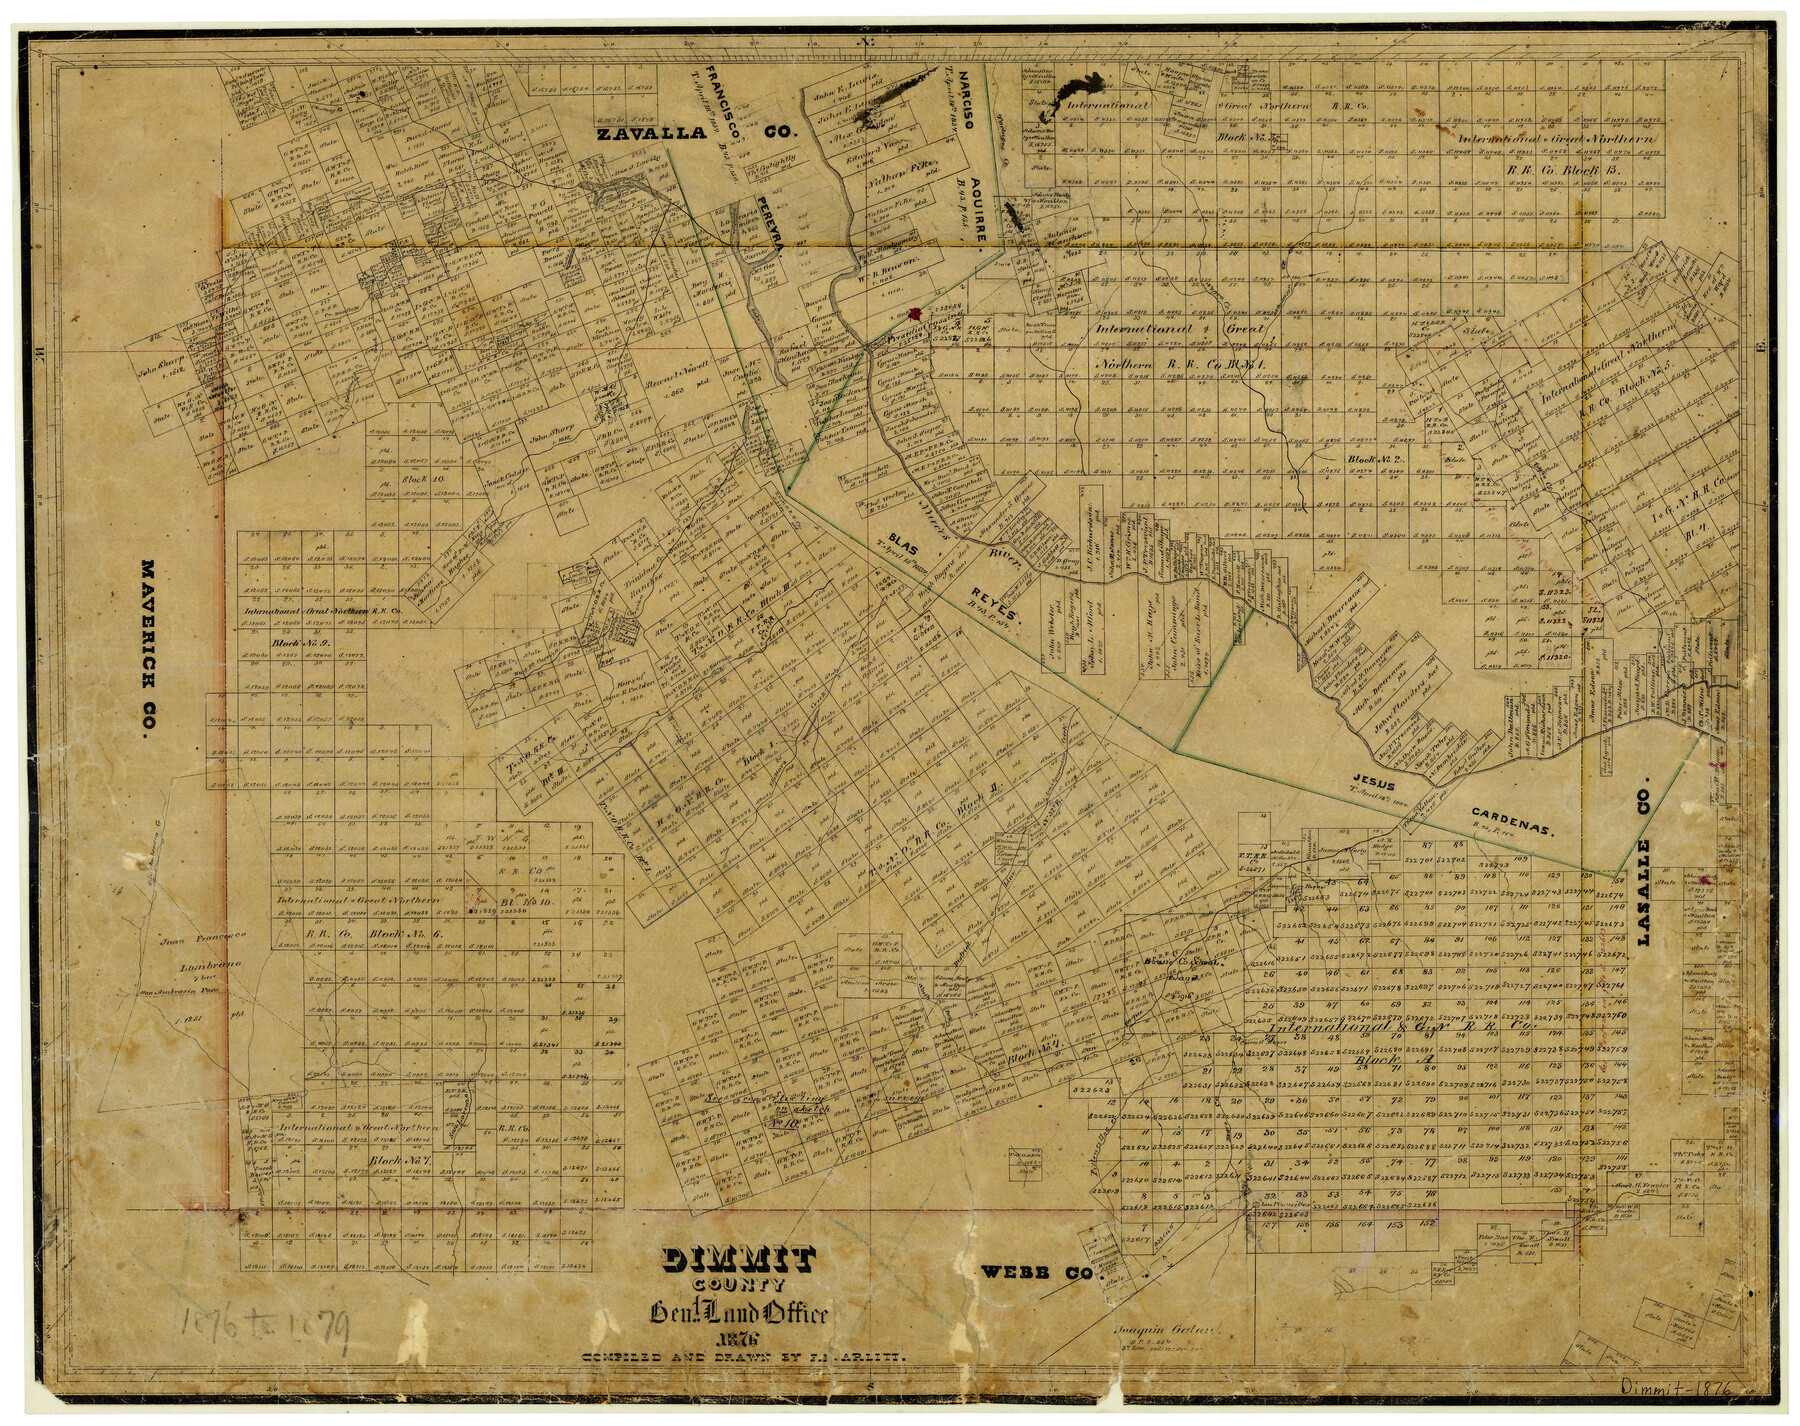 3493, Dimmit County, General Map Collection